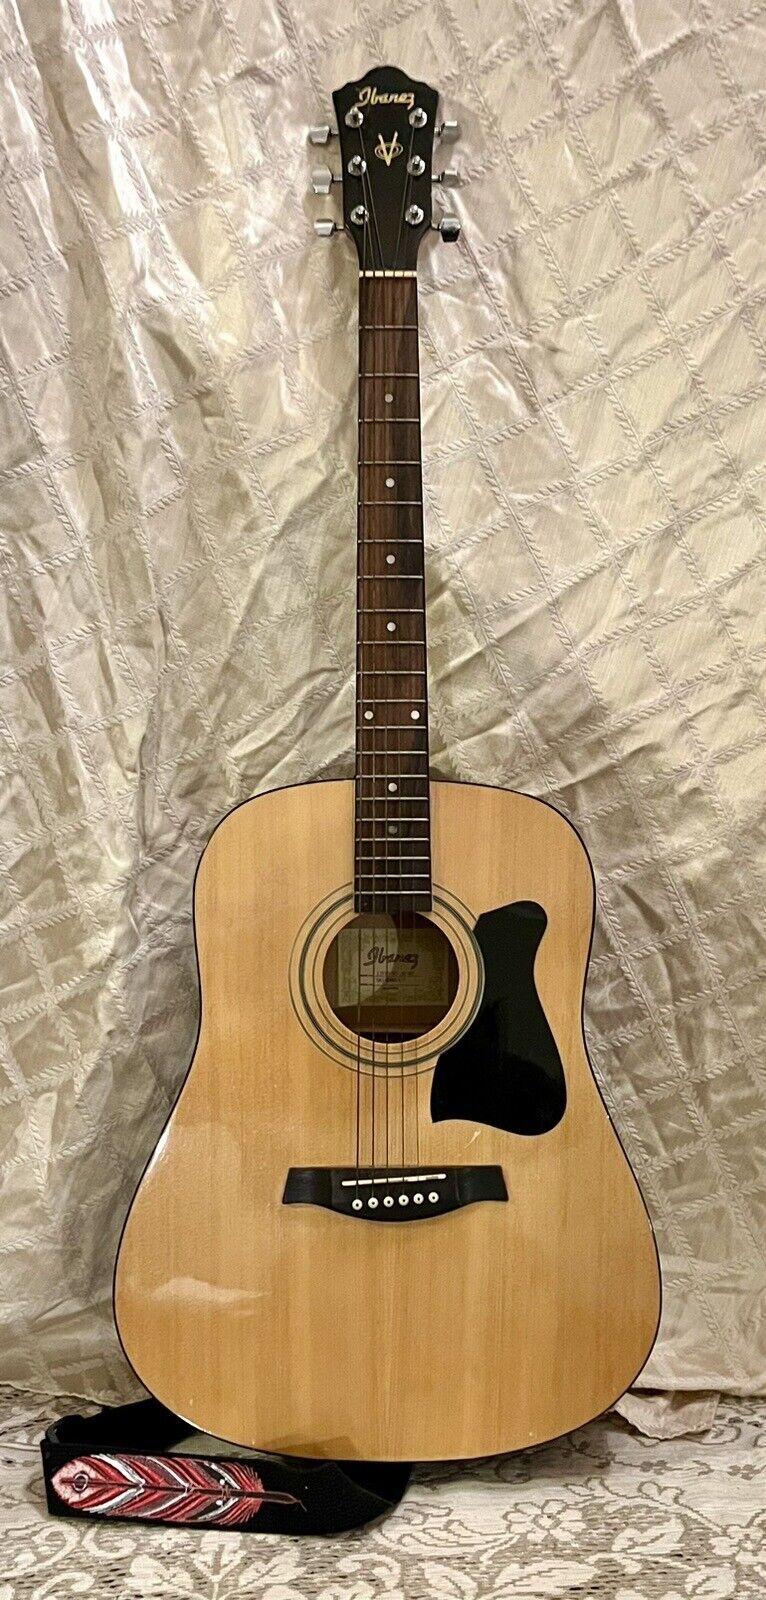 Beautiful Ibanez Acoustic Guitar w Feather Strap Classic 6 String Full Size